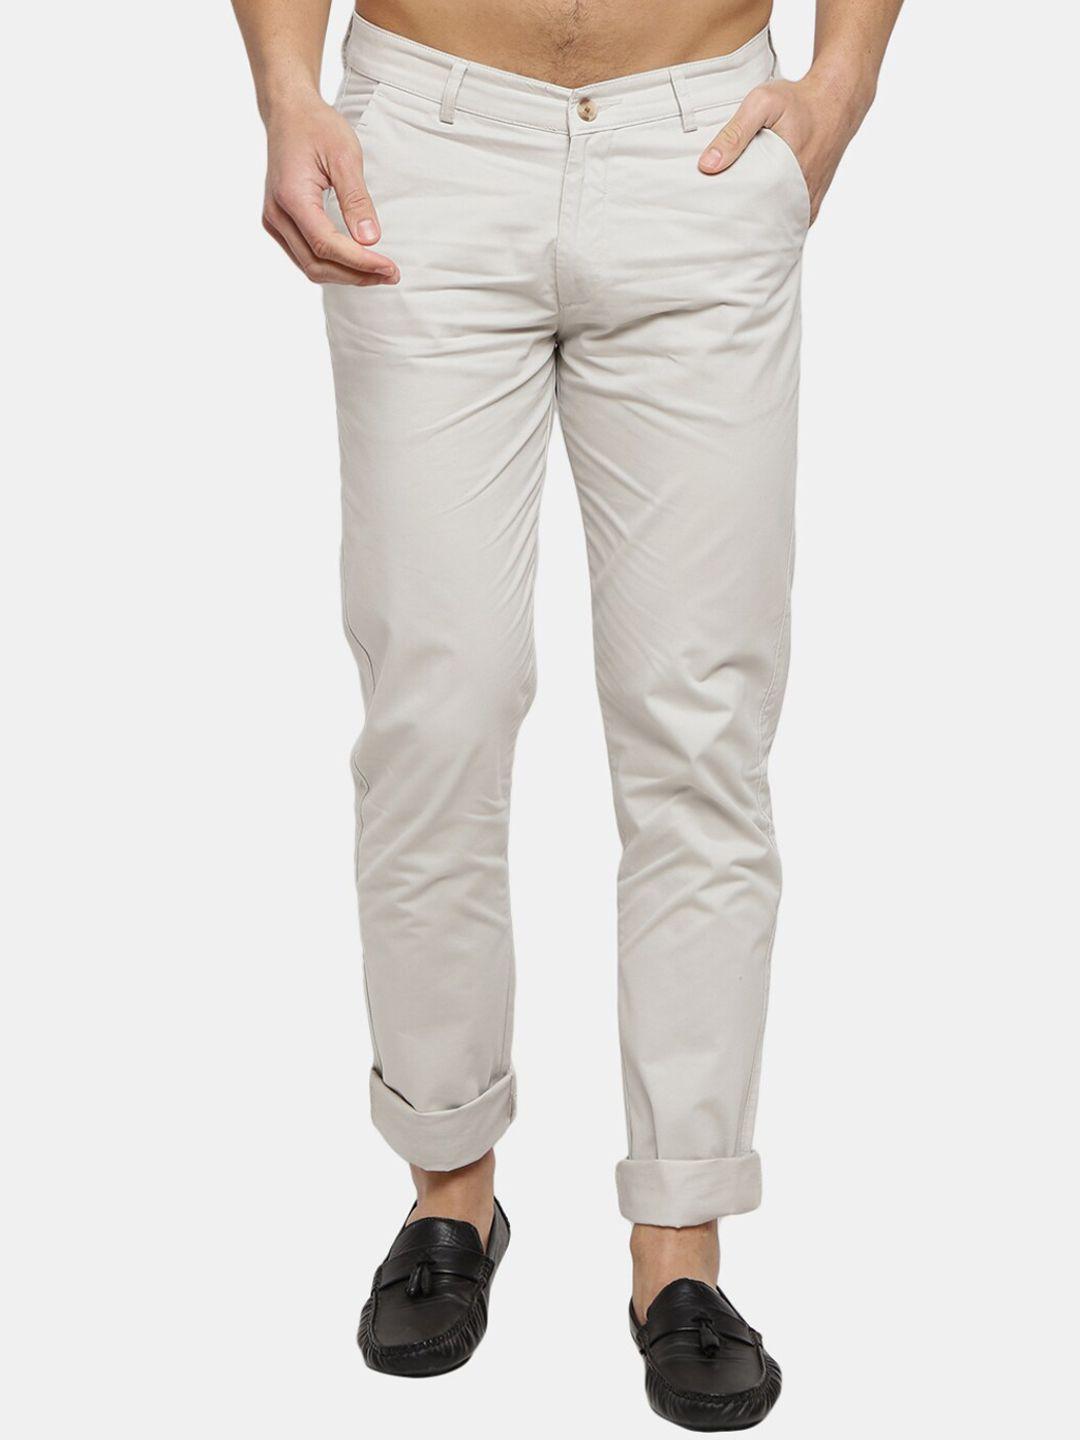 v-mart men cream-coloured classic slim fit chinos trousers